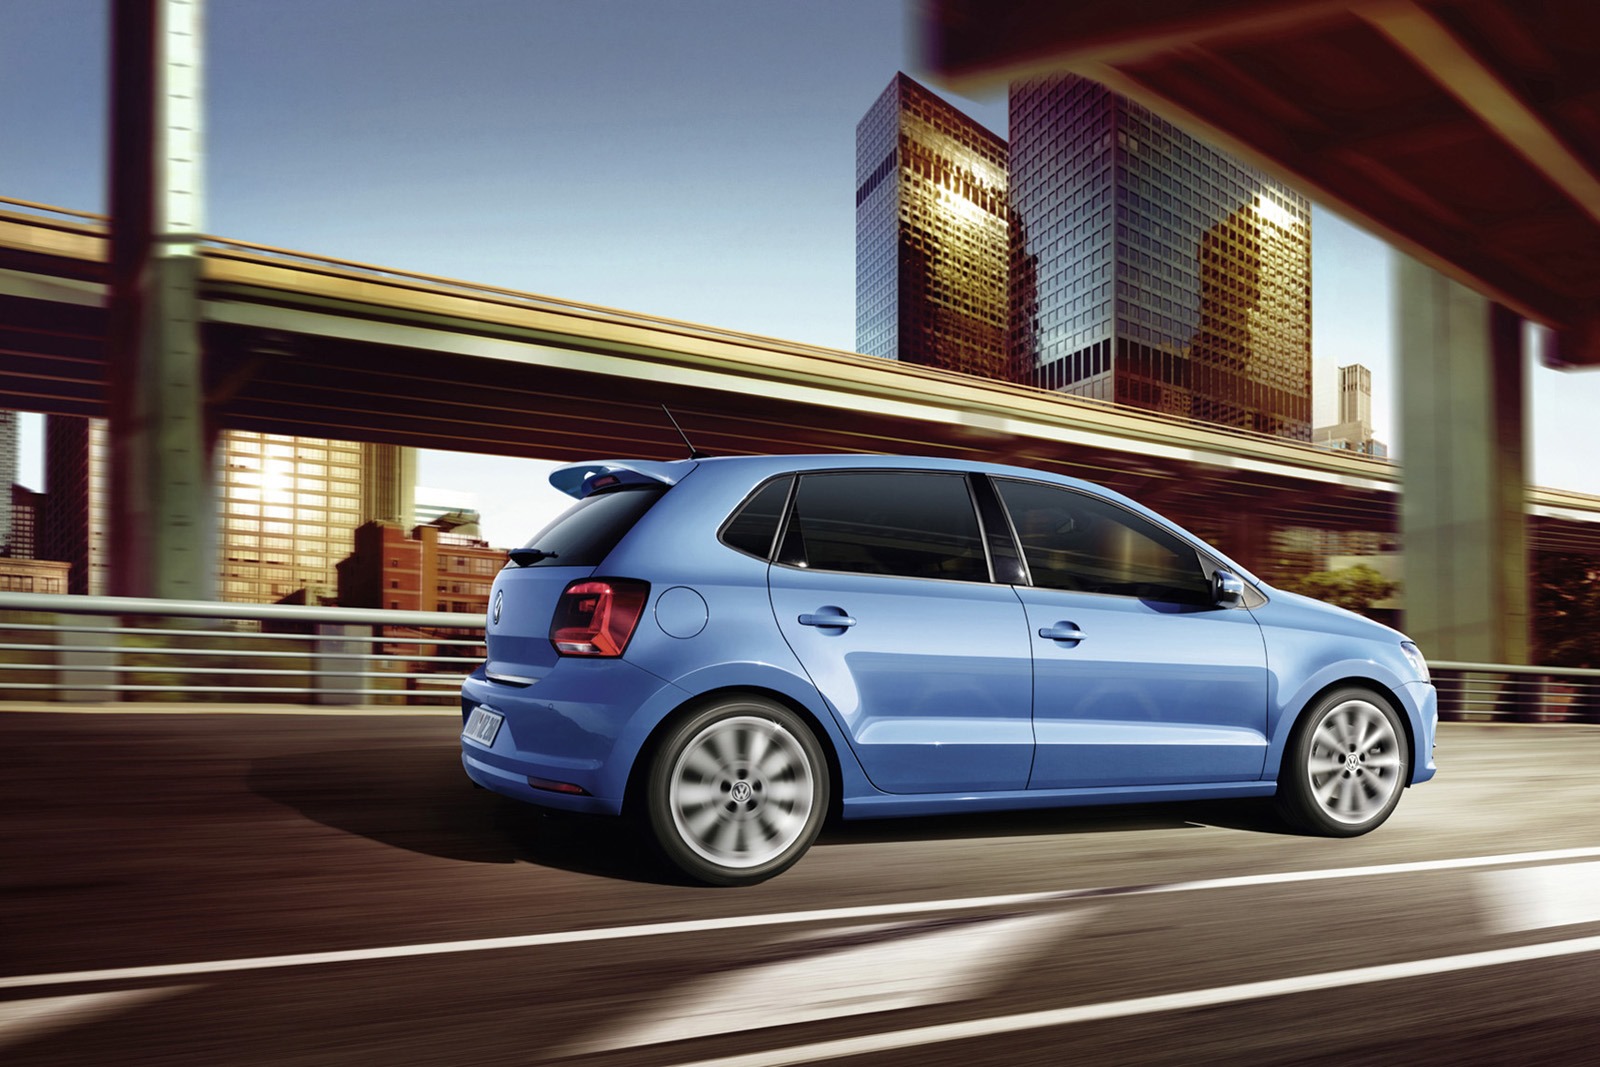 VW Polo facelift genuine accessories now available in Europe